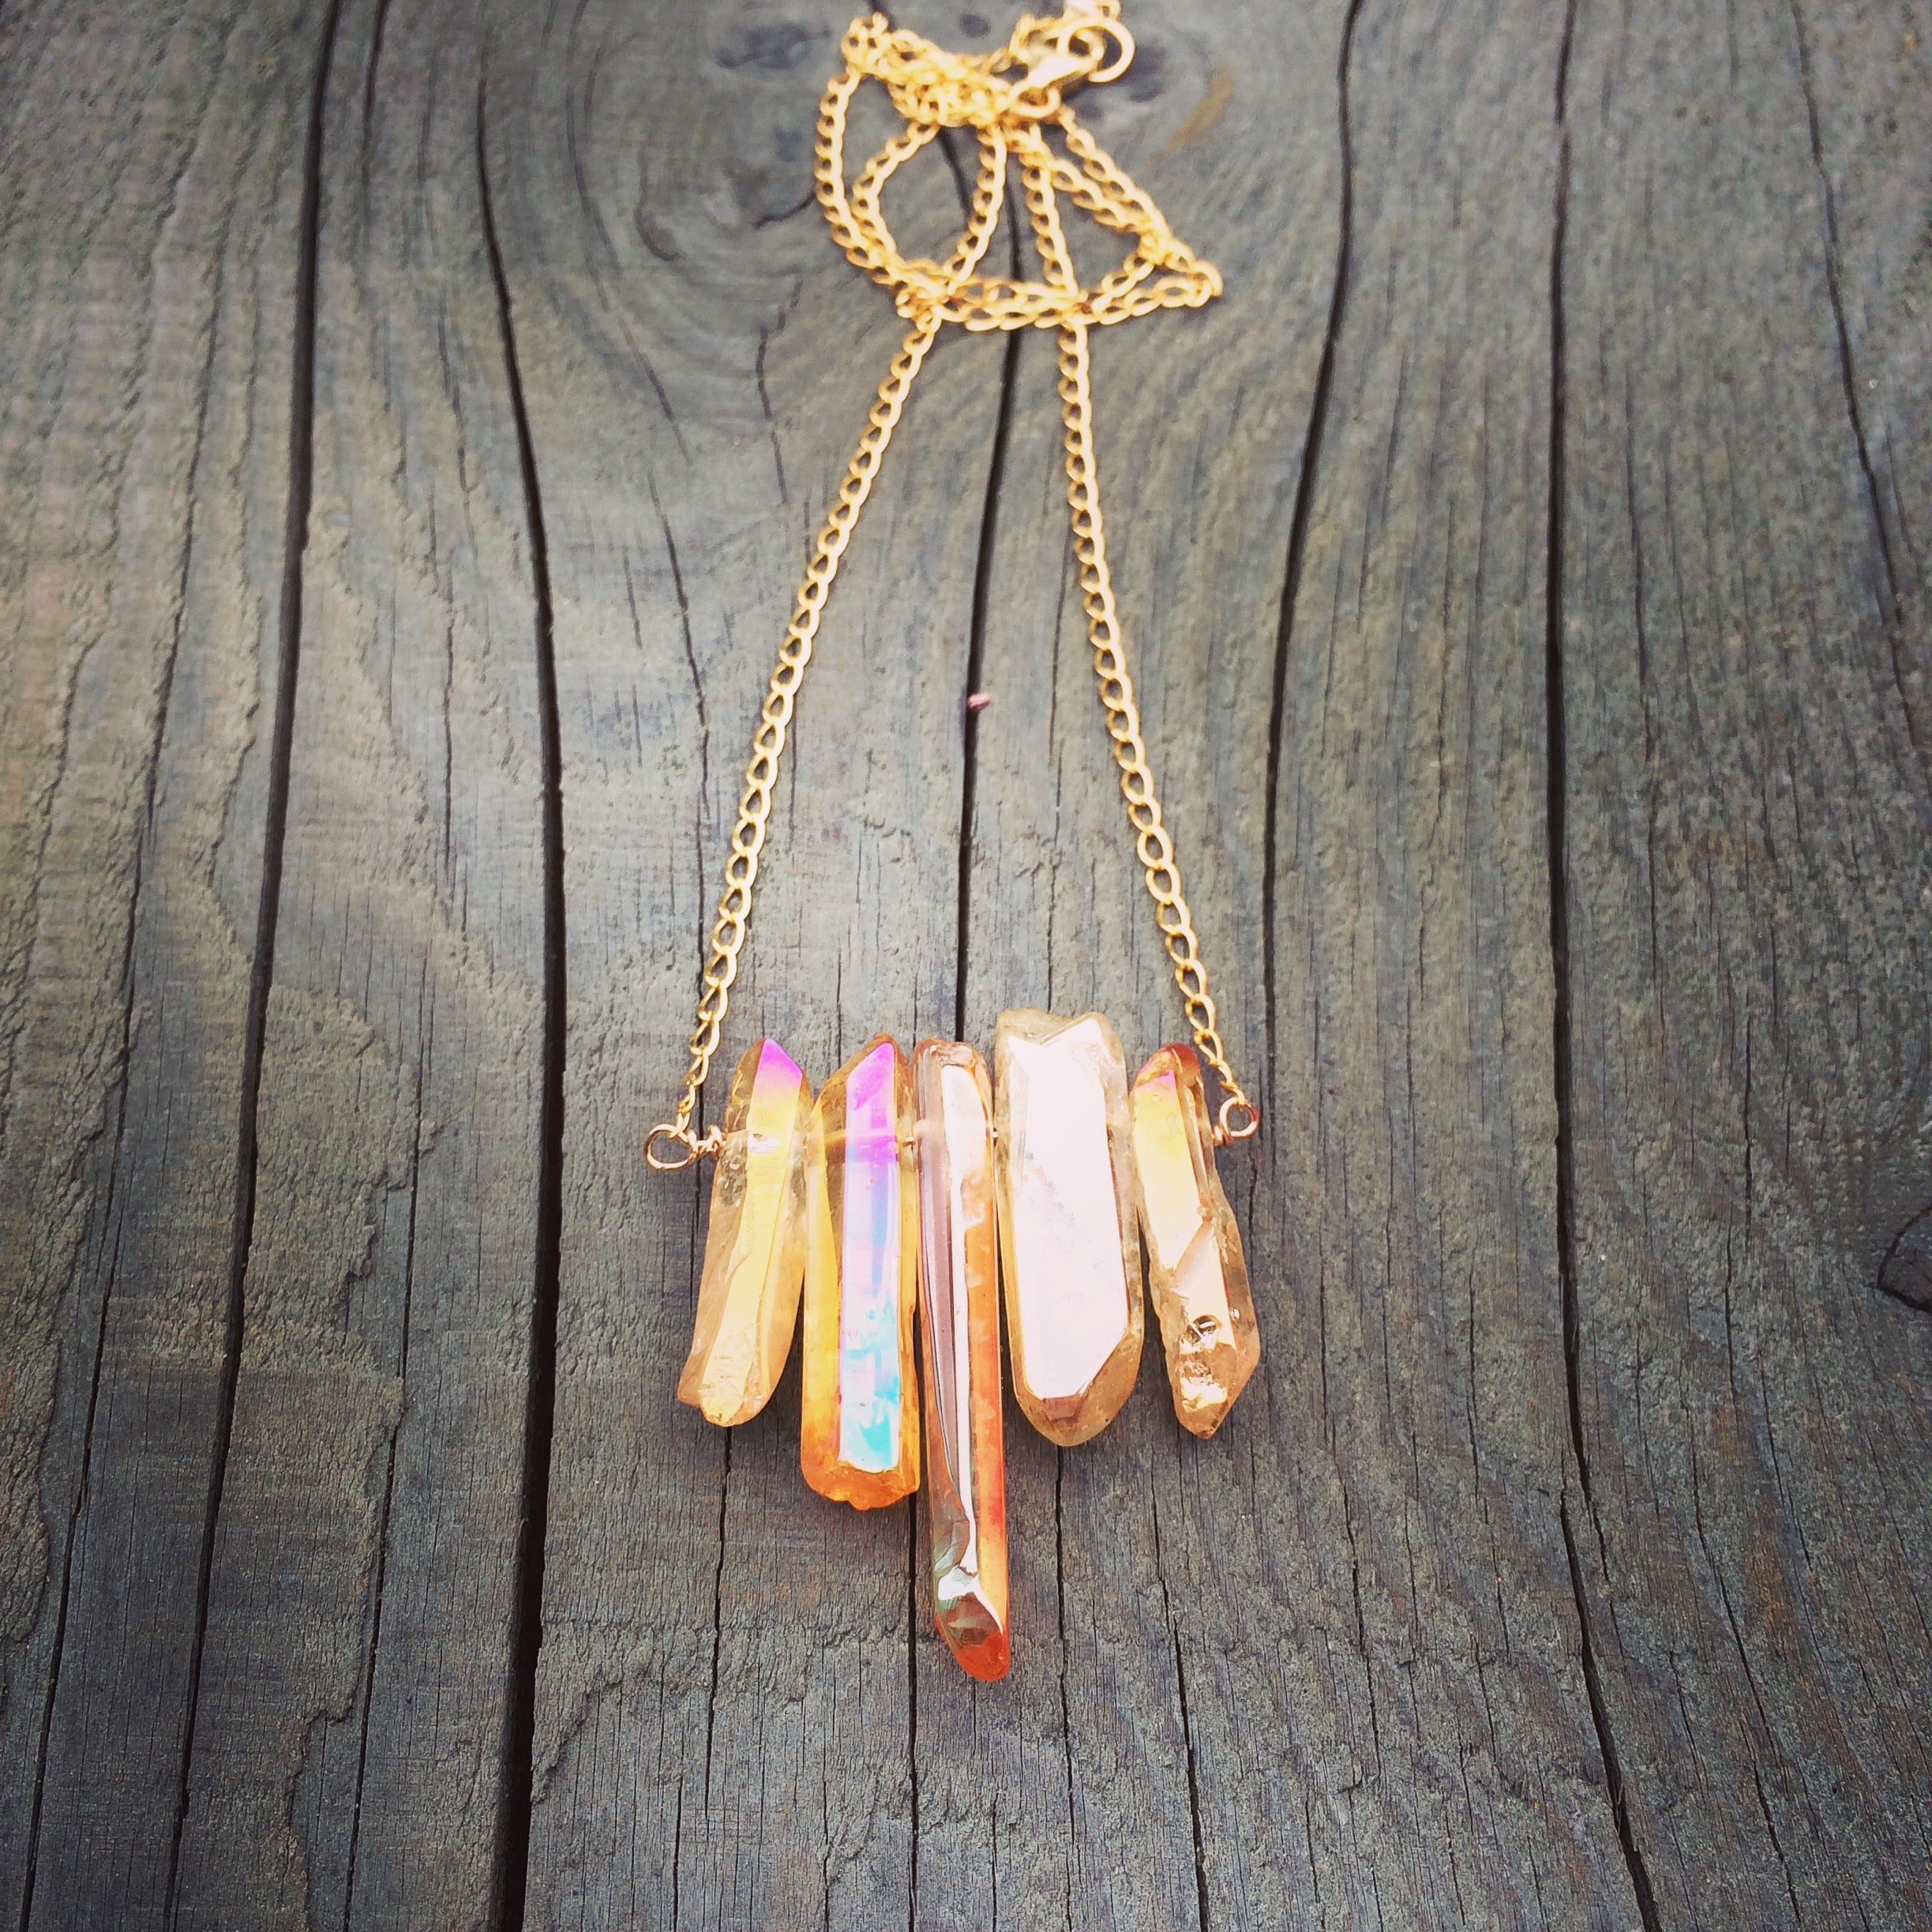 Five orangey peach crystals in a row on a chain on a wooden background.